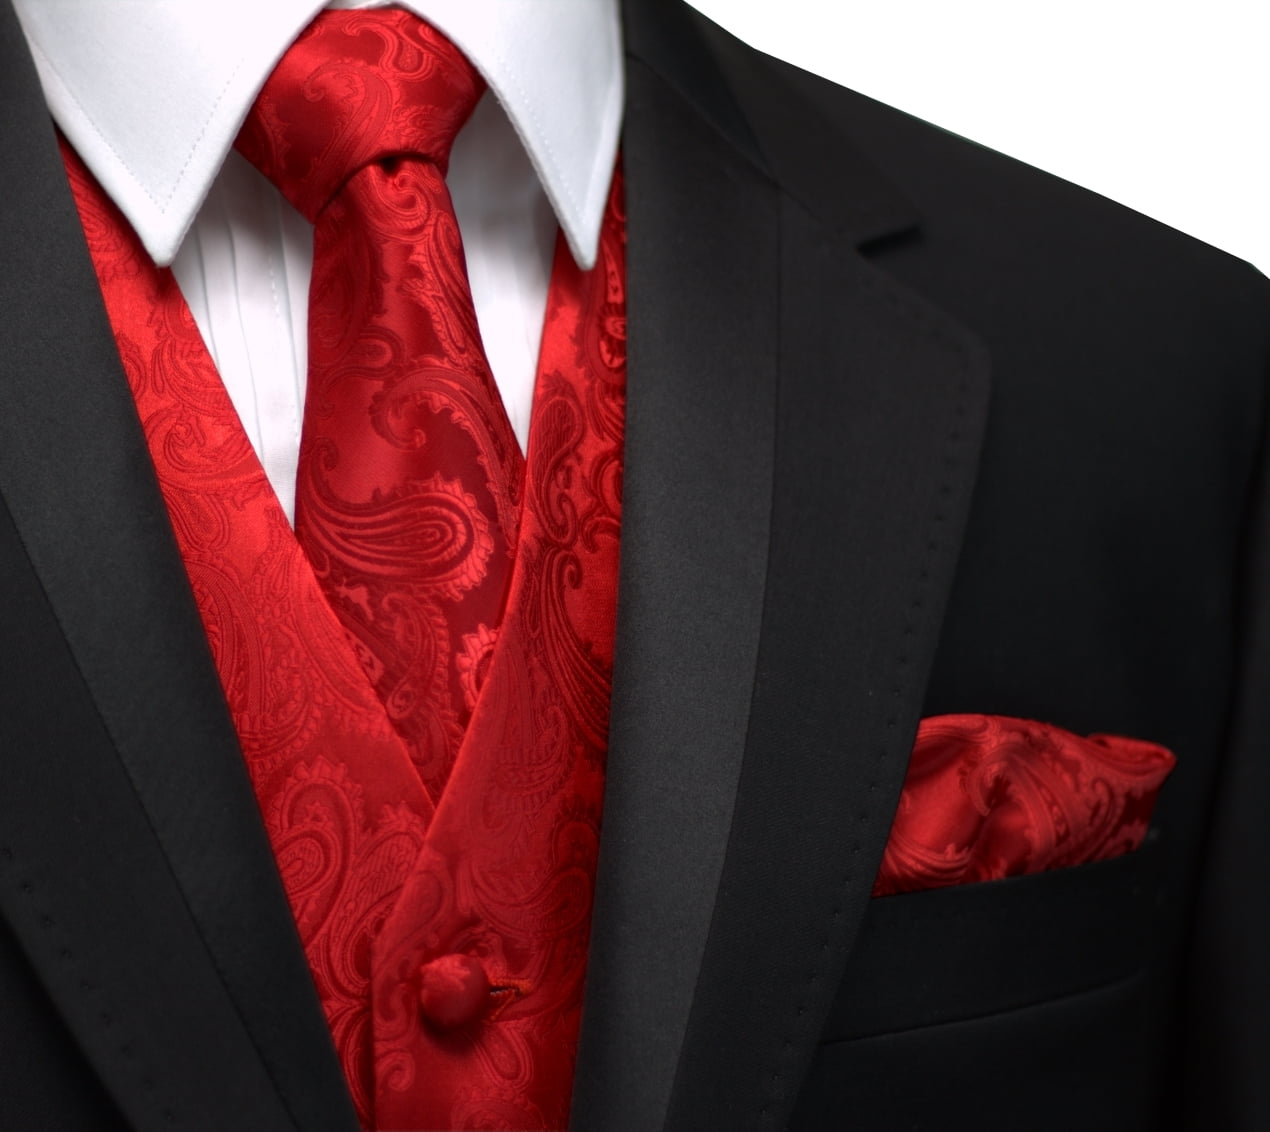 Career Details about   Paisley Tie and Pocket Hankie Set Tuxedo Formal Cruise Prom